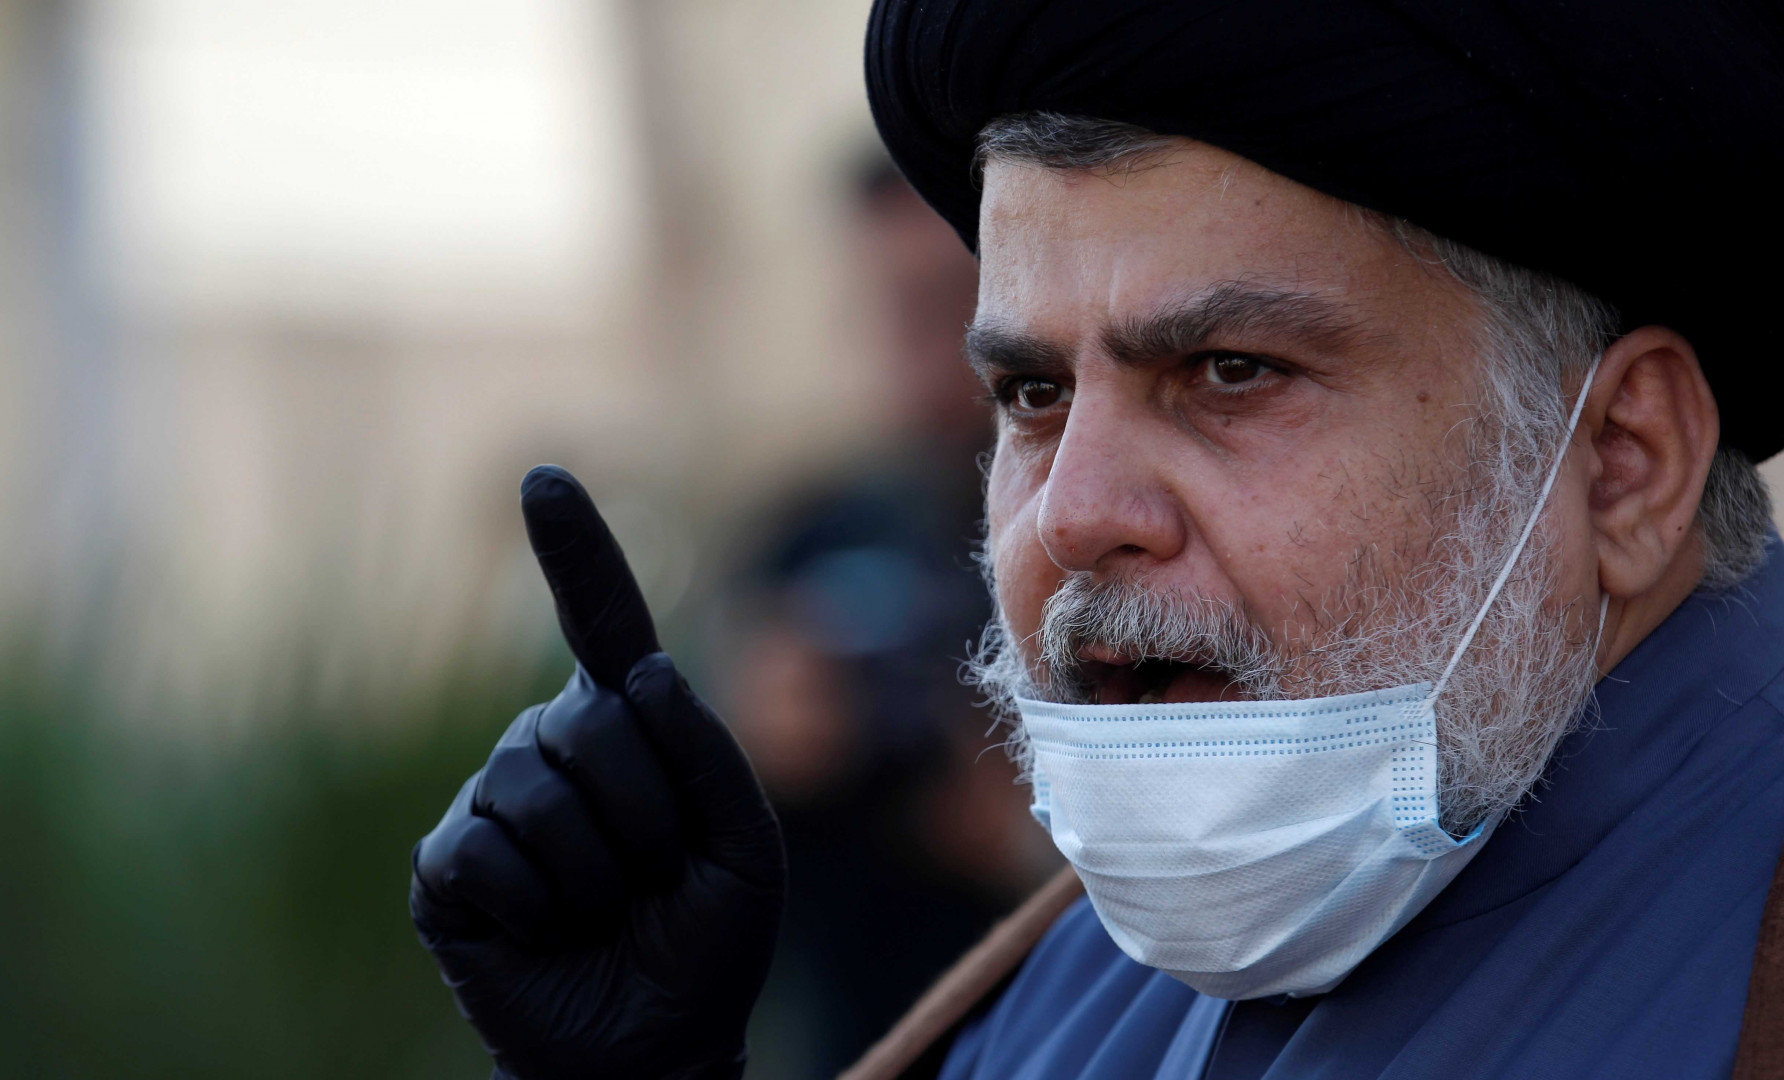 Al-Sadr discloses "accurate information" about "political pressure" exerted on judiciary